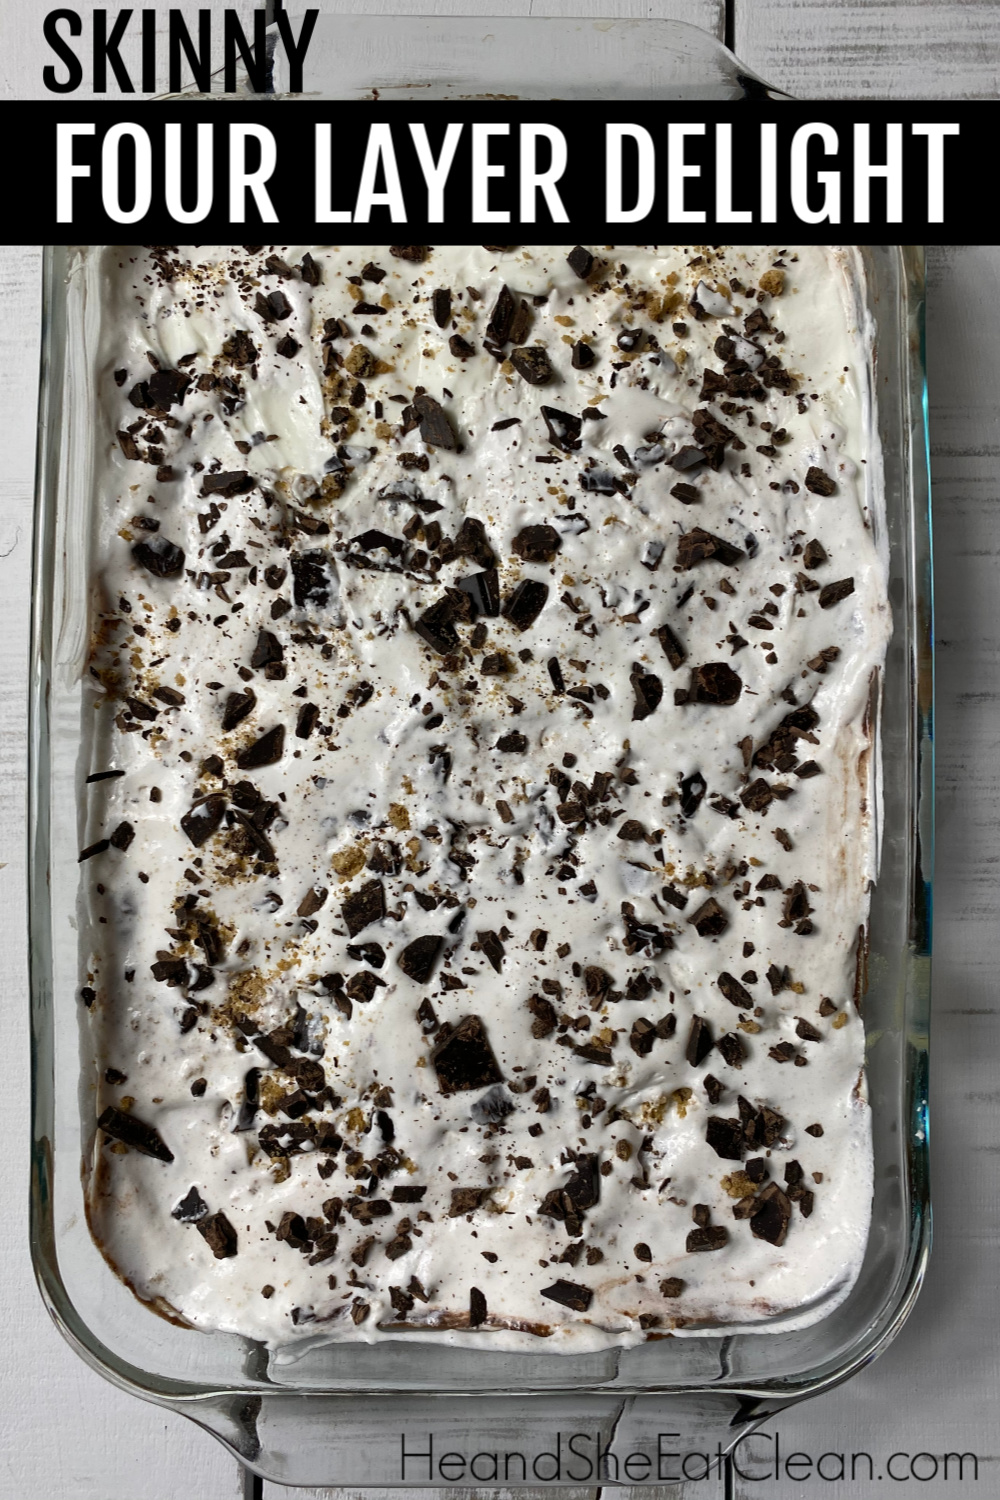 white Pyrex dish of four layer dessert with cookie crumbs & chocolate chips on top